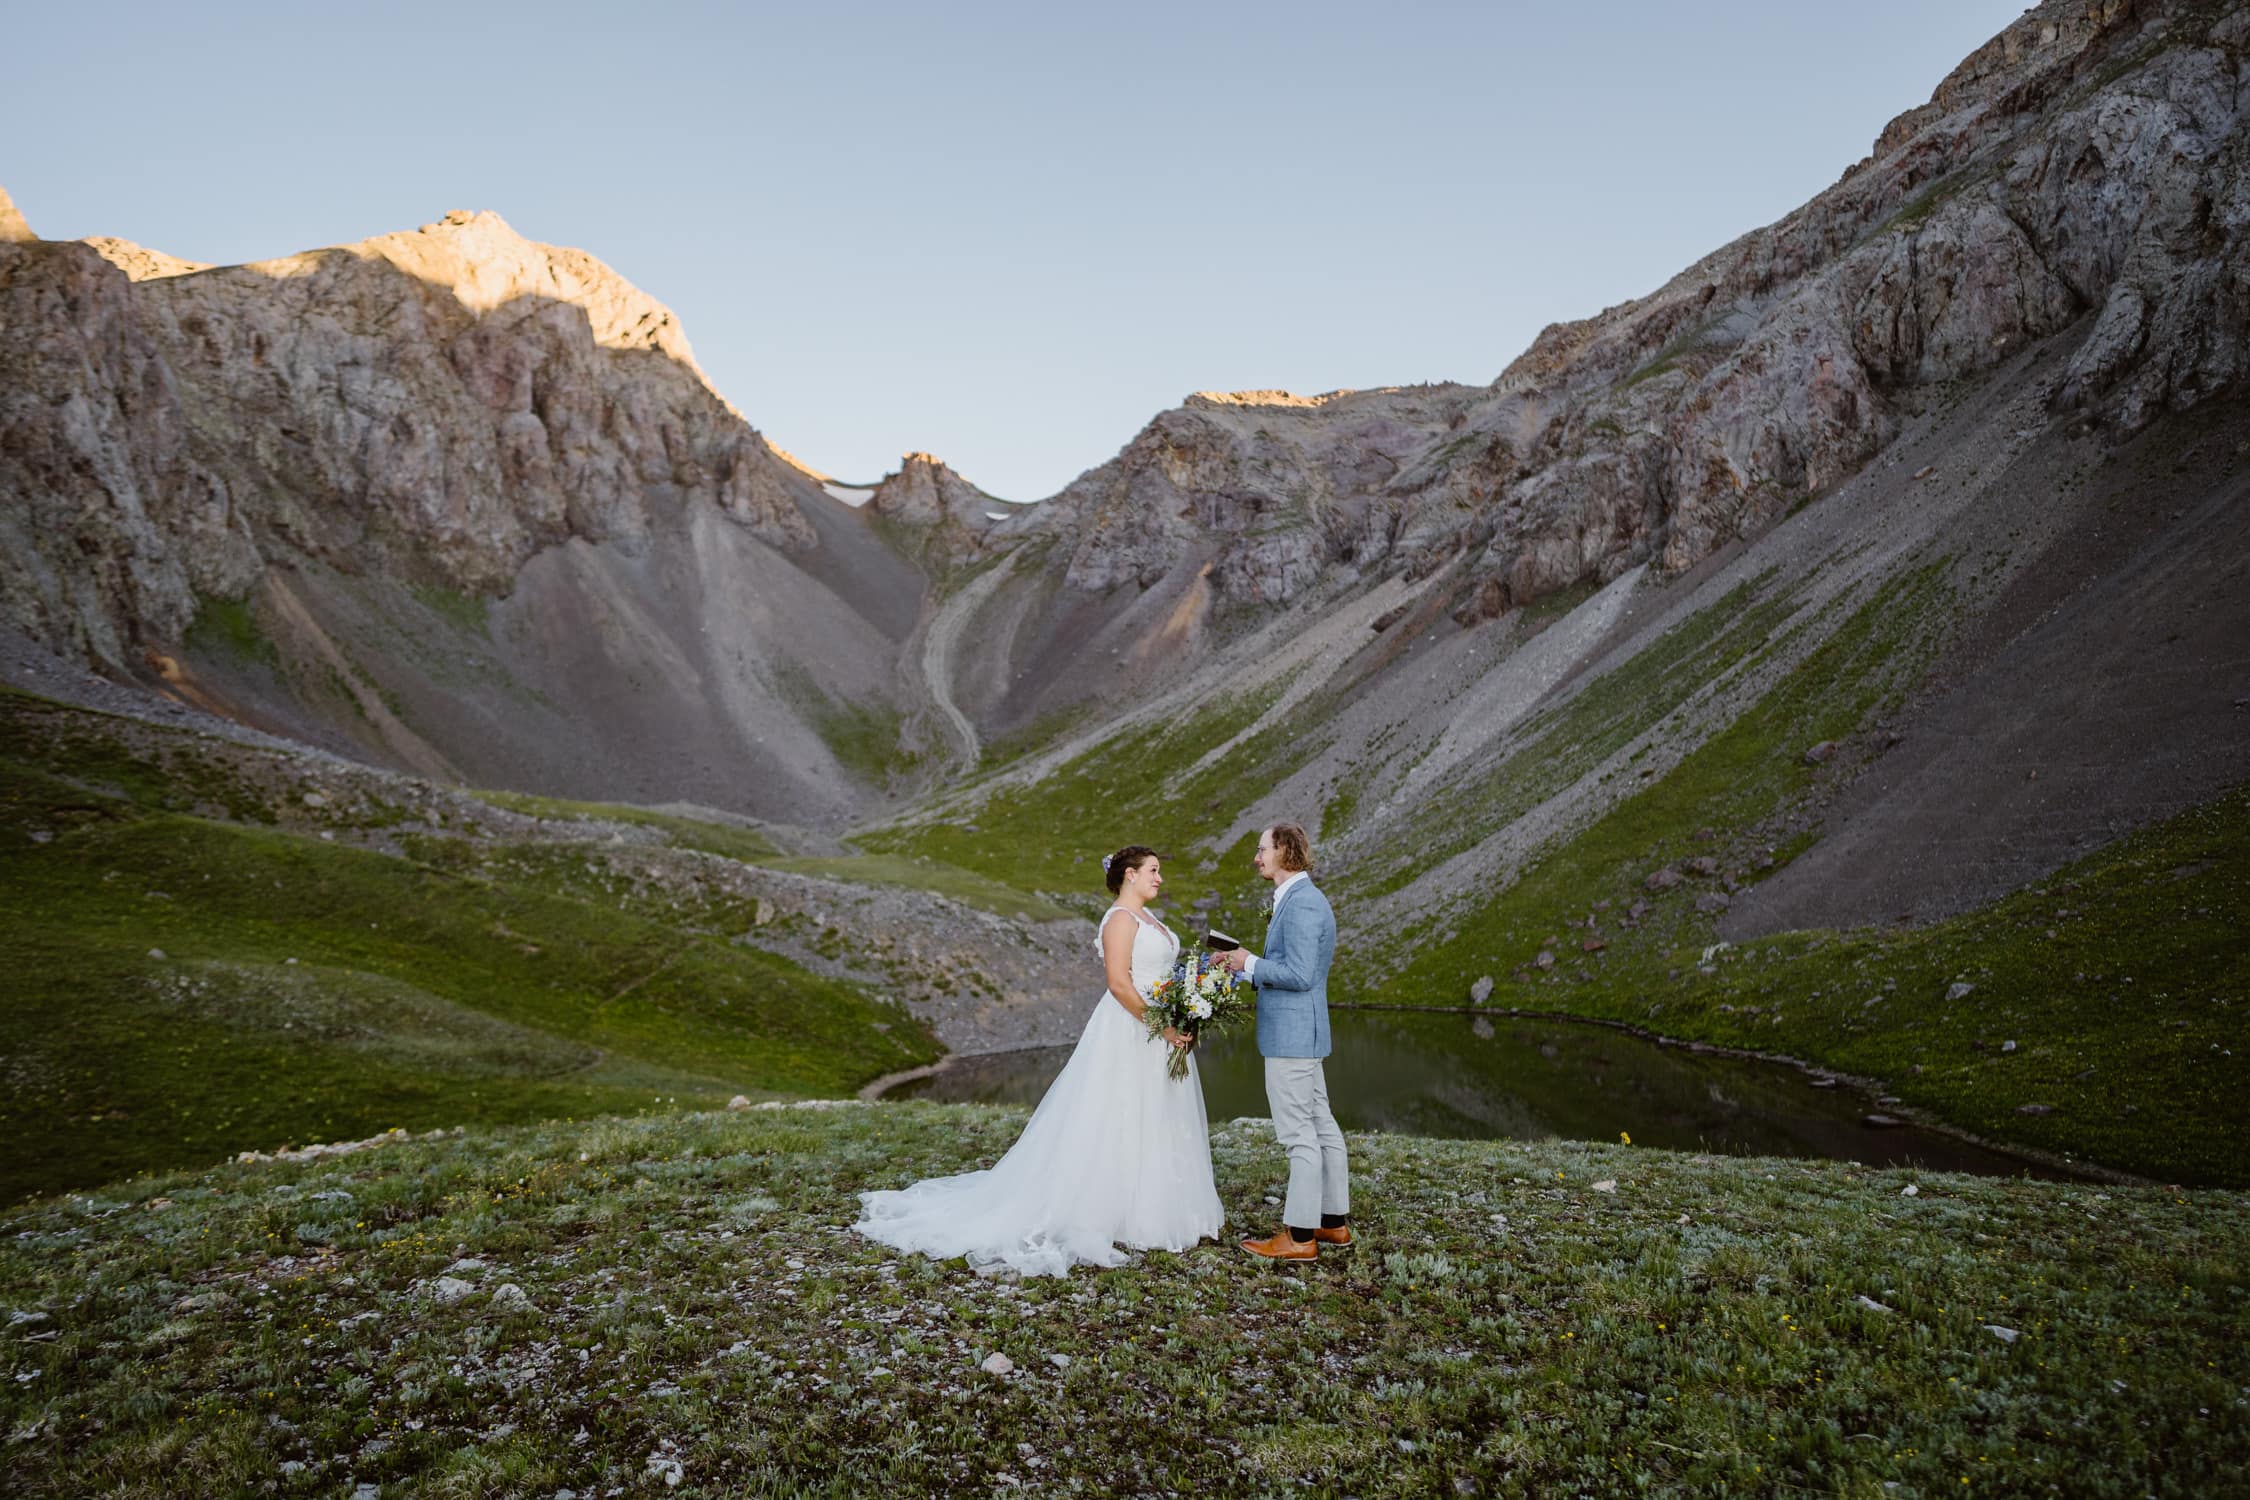 A private vow ceremony in the mountains of Colorado.